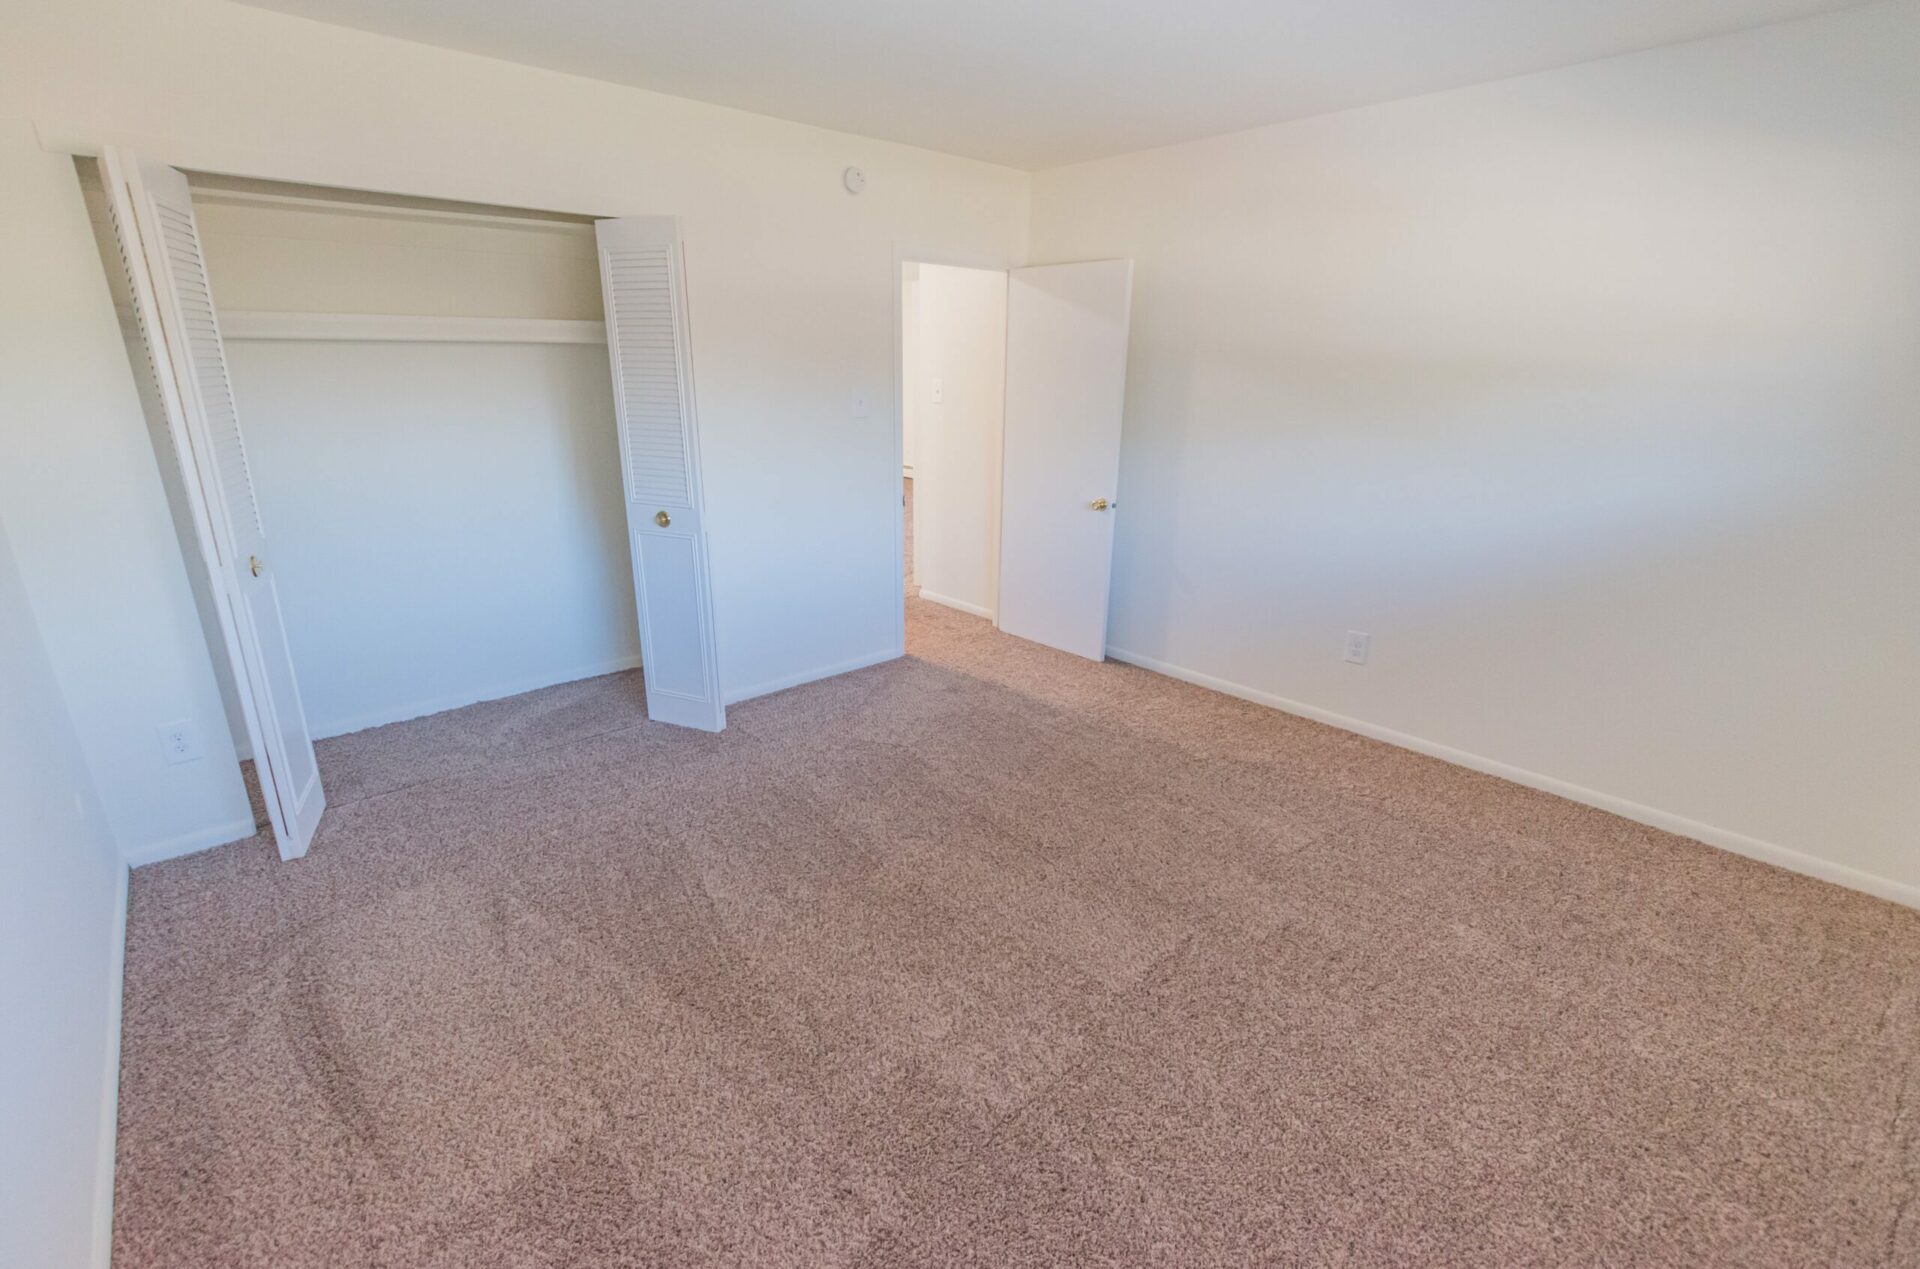 Living room area of an apartment unfurnished, fitted with carpet flooring, a closet, and a doorway to a bed room area